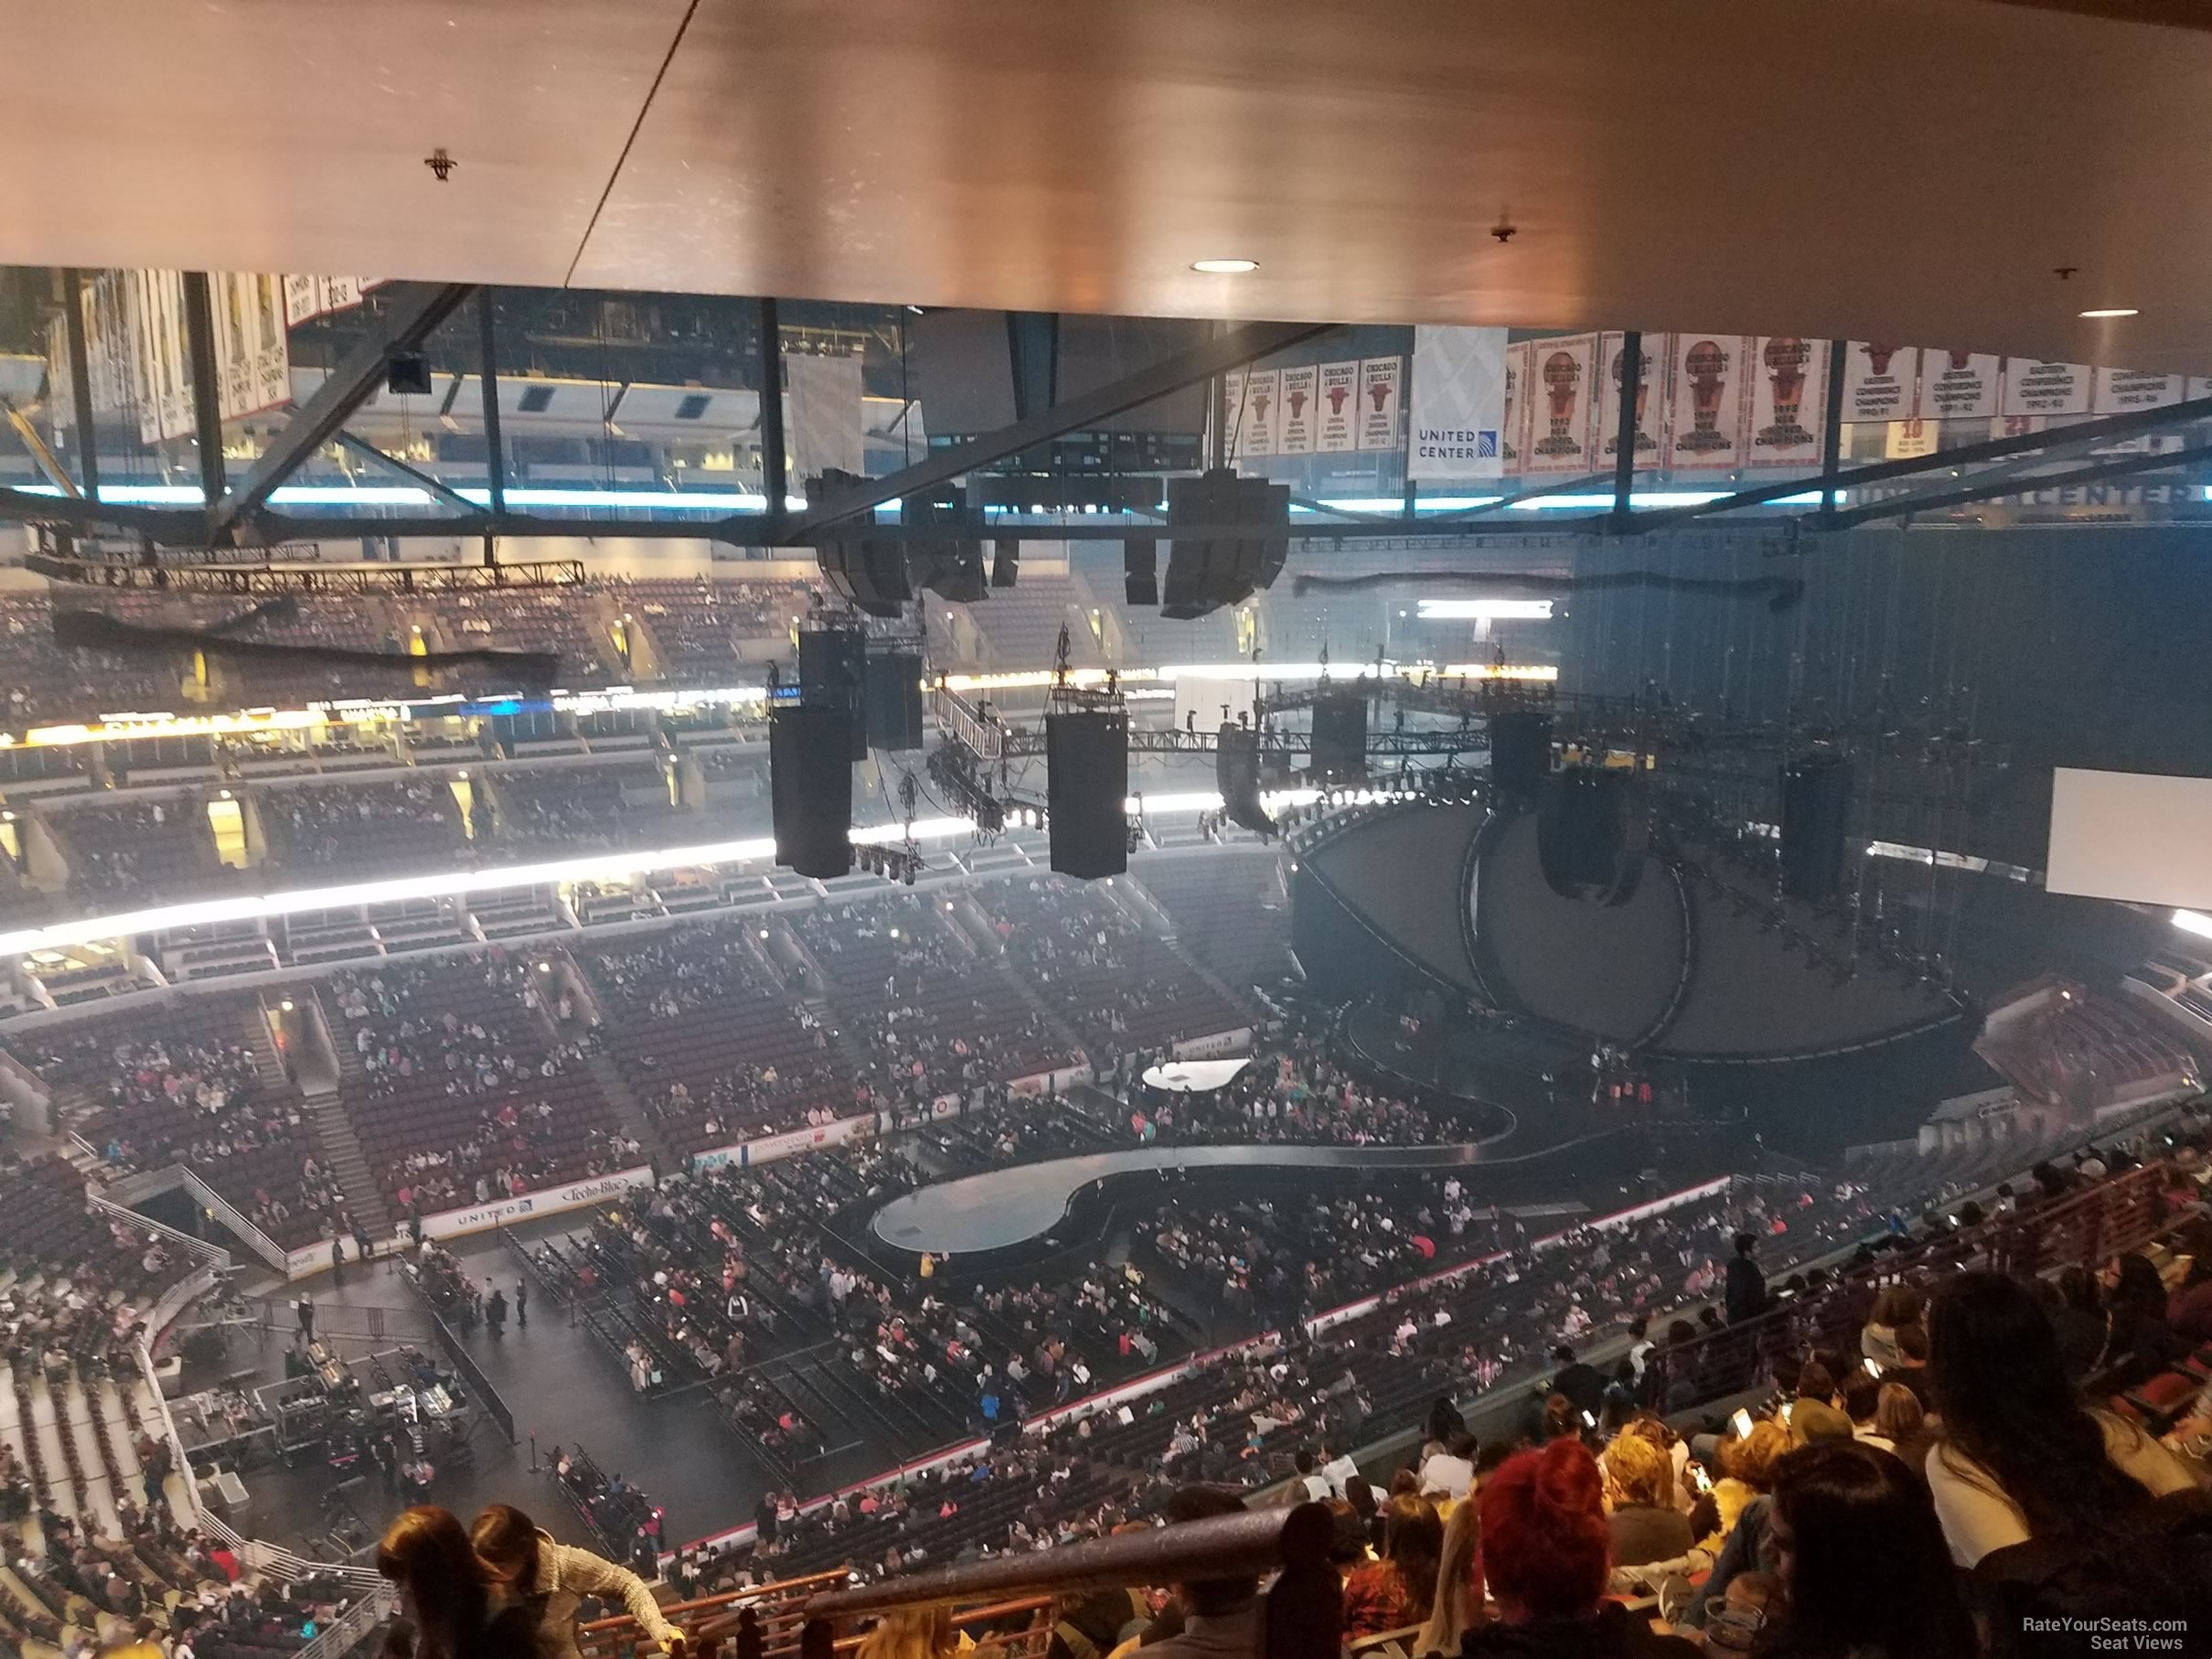 section 304, row 17 seat view  for concert - united center